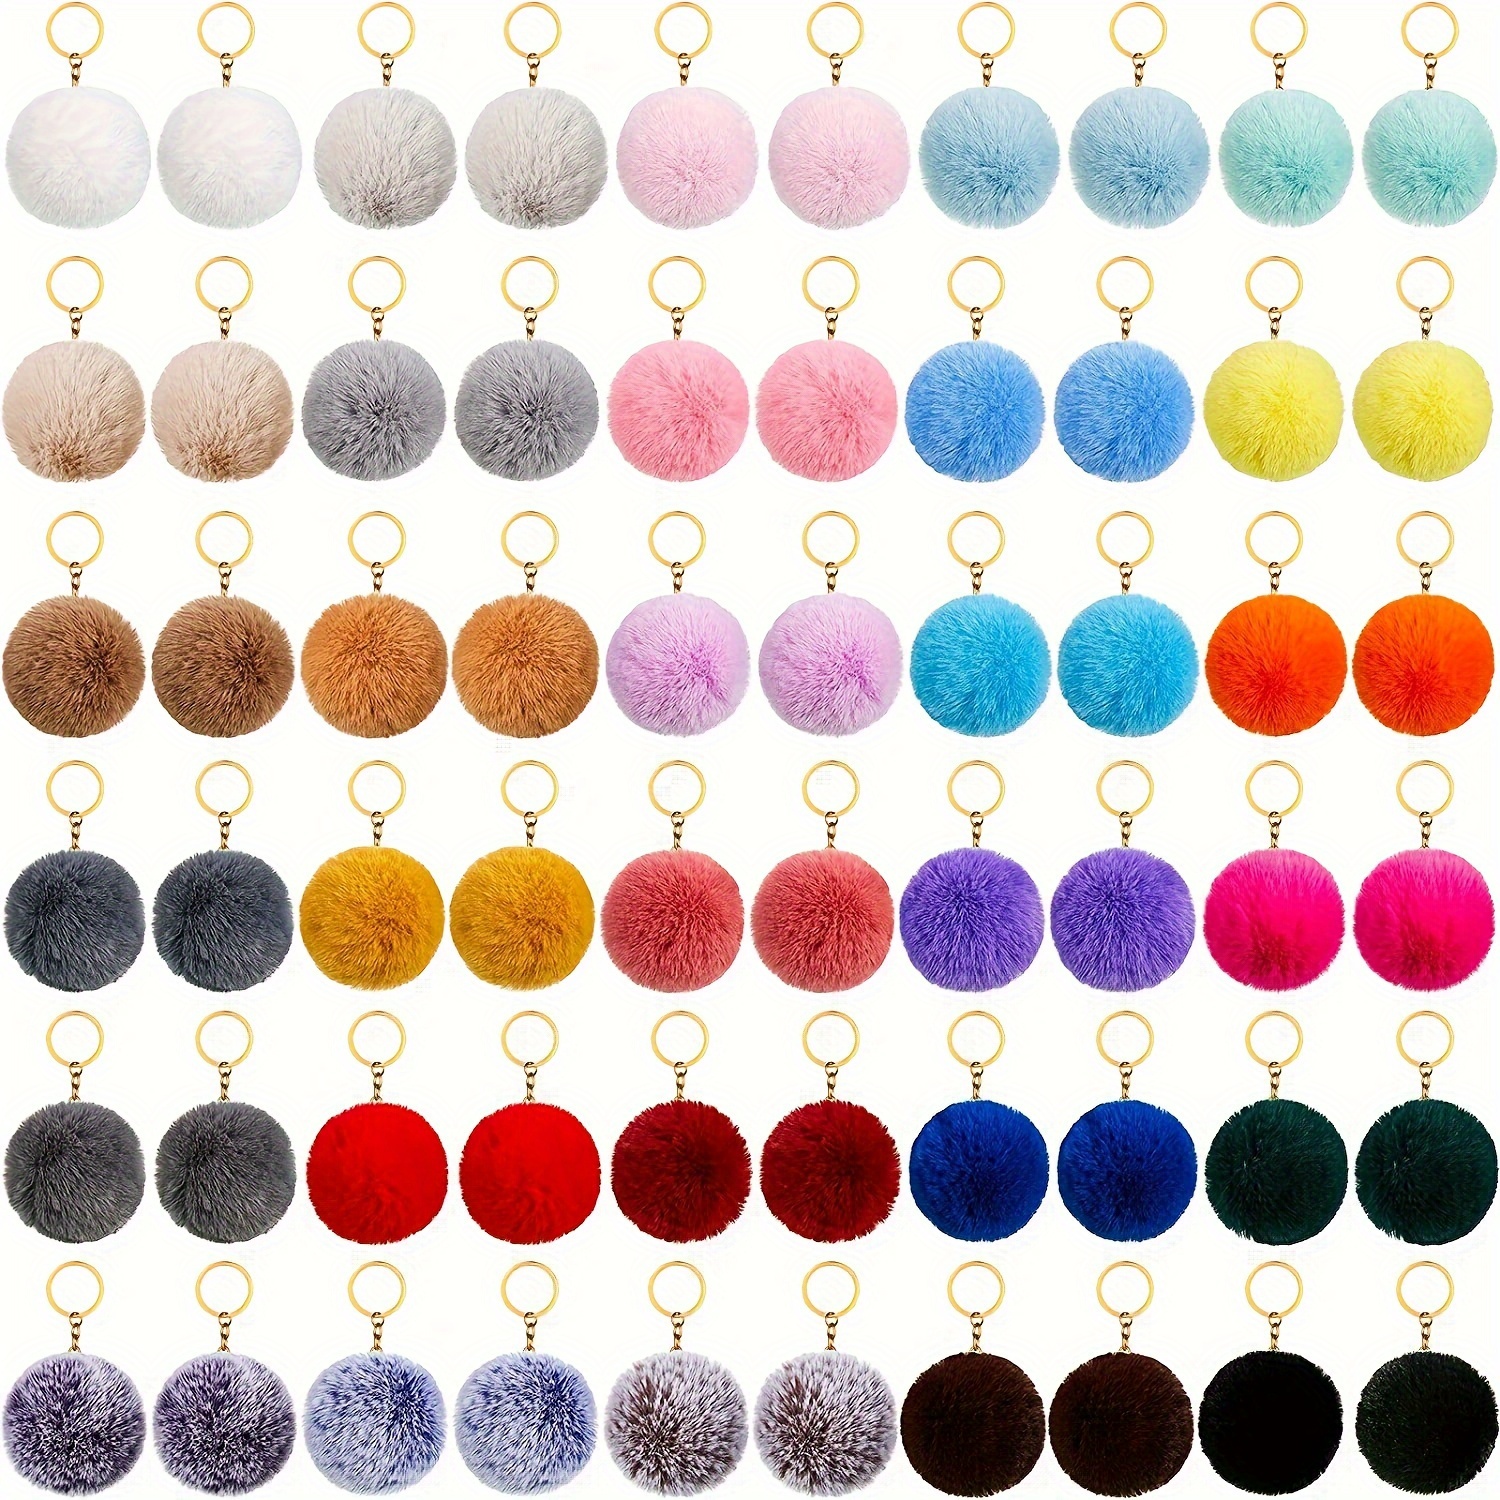 

50pcs Plush Pom-poms With Key Chain, Embryo Fluffy Artificial Fur Pom-pom Keychain Jewelry Accessories, Bag Pendants For Women And Daily Use